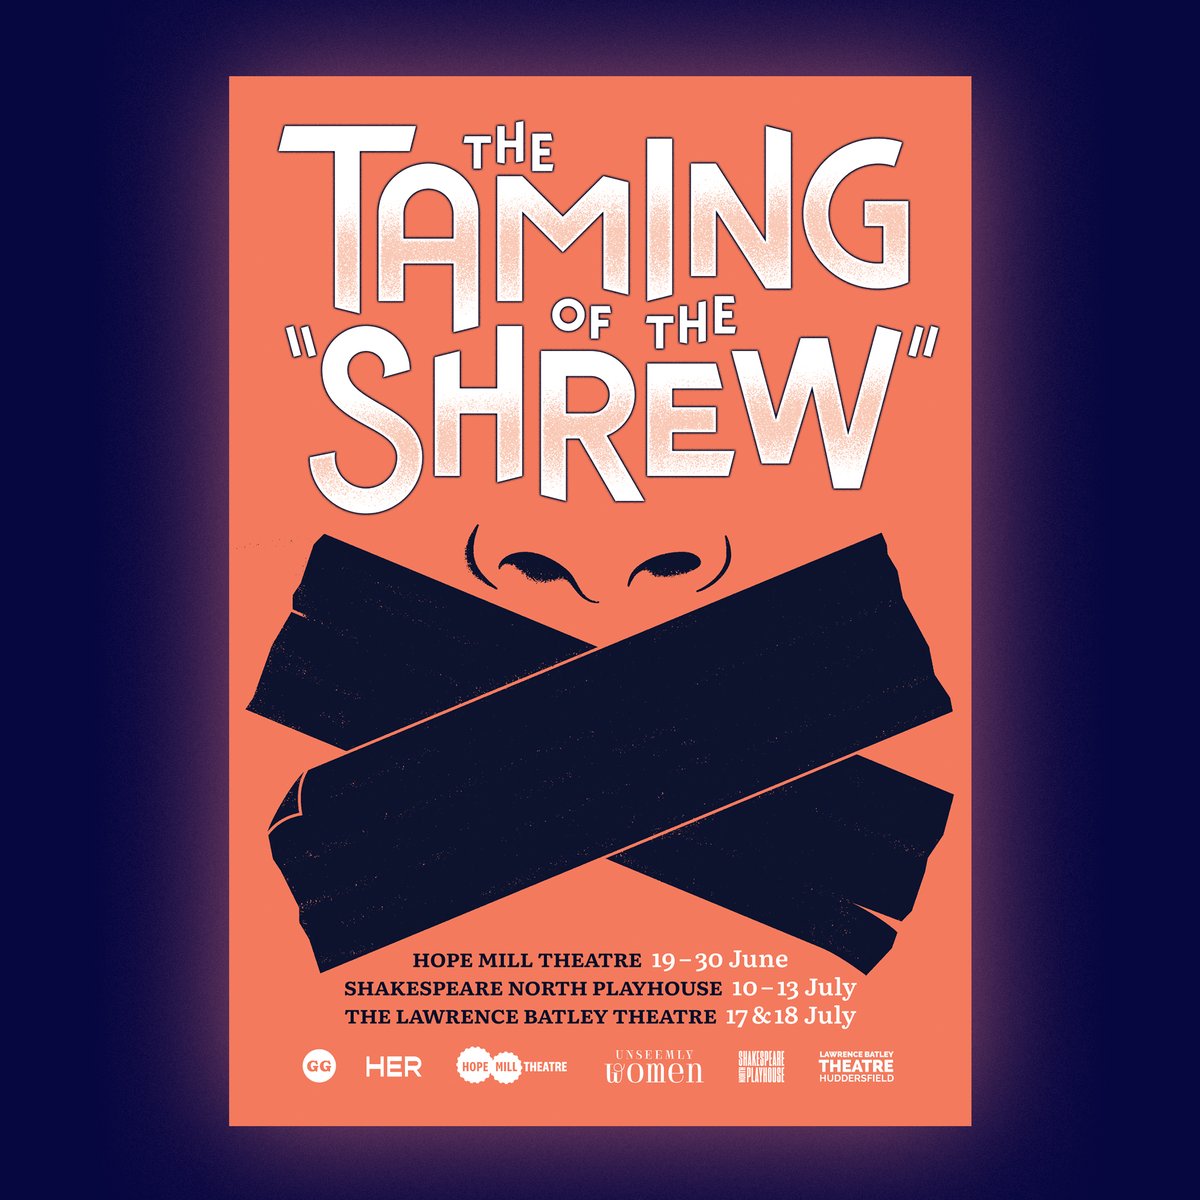 The Taming of the 'Shrew' is officially ON SALE across our 3 exceptional venue partners 🎫 🎉 📅 19 - 30 June 📍 @hopemilltheatre 🎫 hopemilltheatre.co.uk/event/the-tami… 📅 17 - 18 July 📍 @theLBT 🎫 thelbt.org/what-s-on/dram… 📅 10 - 13 July 📍 @ShakespeareNP 🎫 shakespearenorthplayhouse.co.uk/event/the-tami…